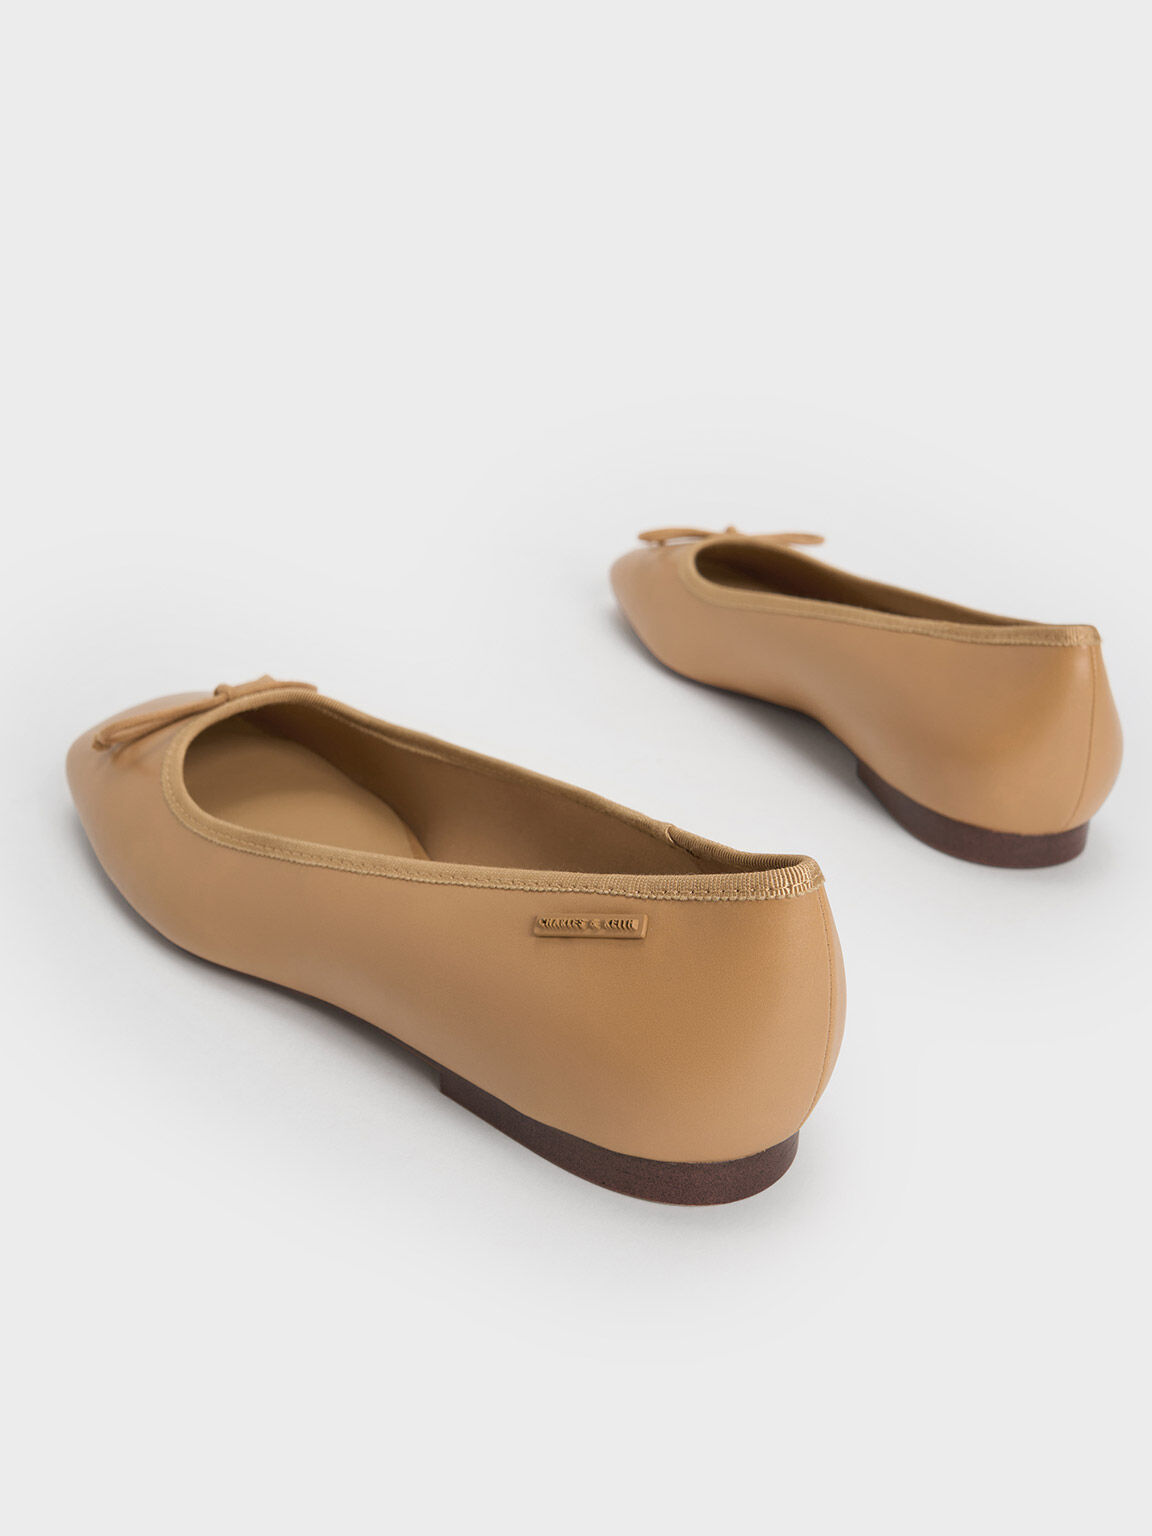 Rounded Square-Toe Bow Ballerinas, Camel, hi-res